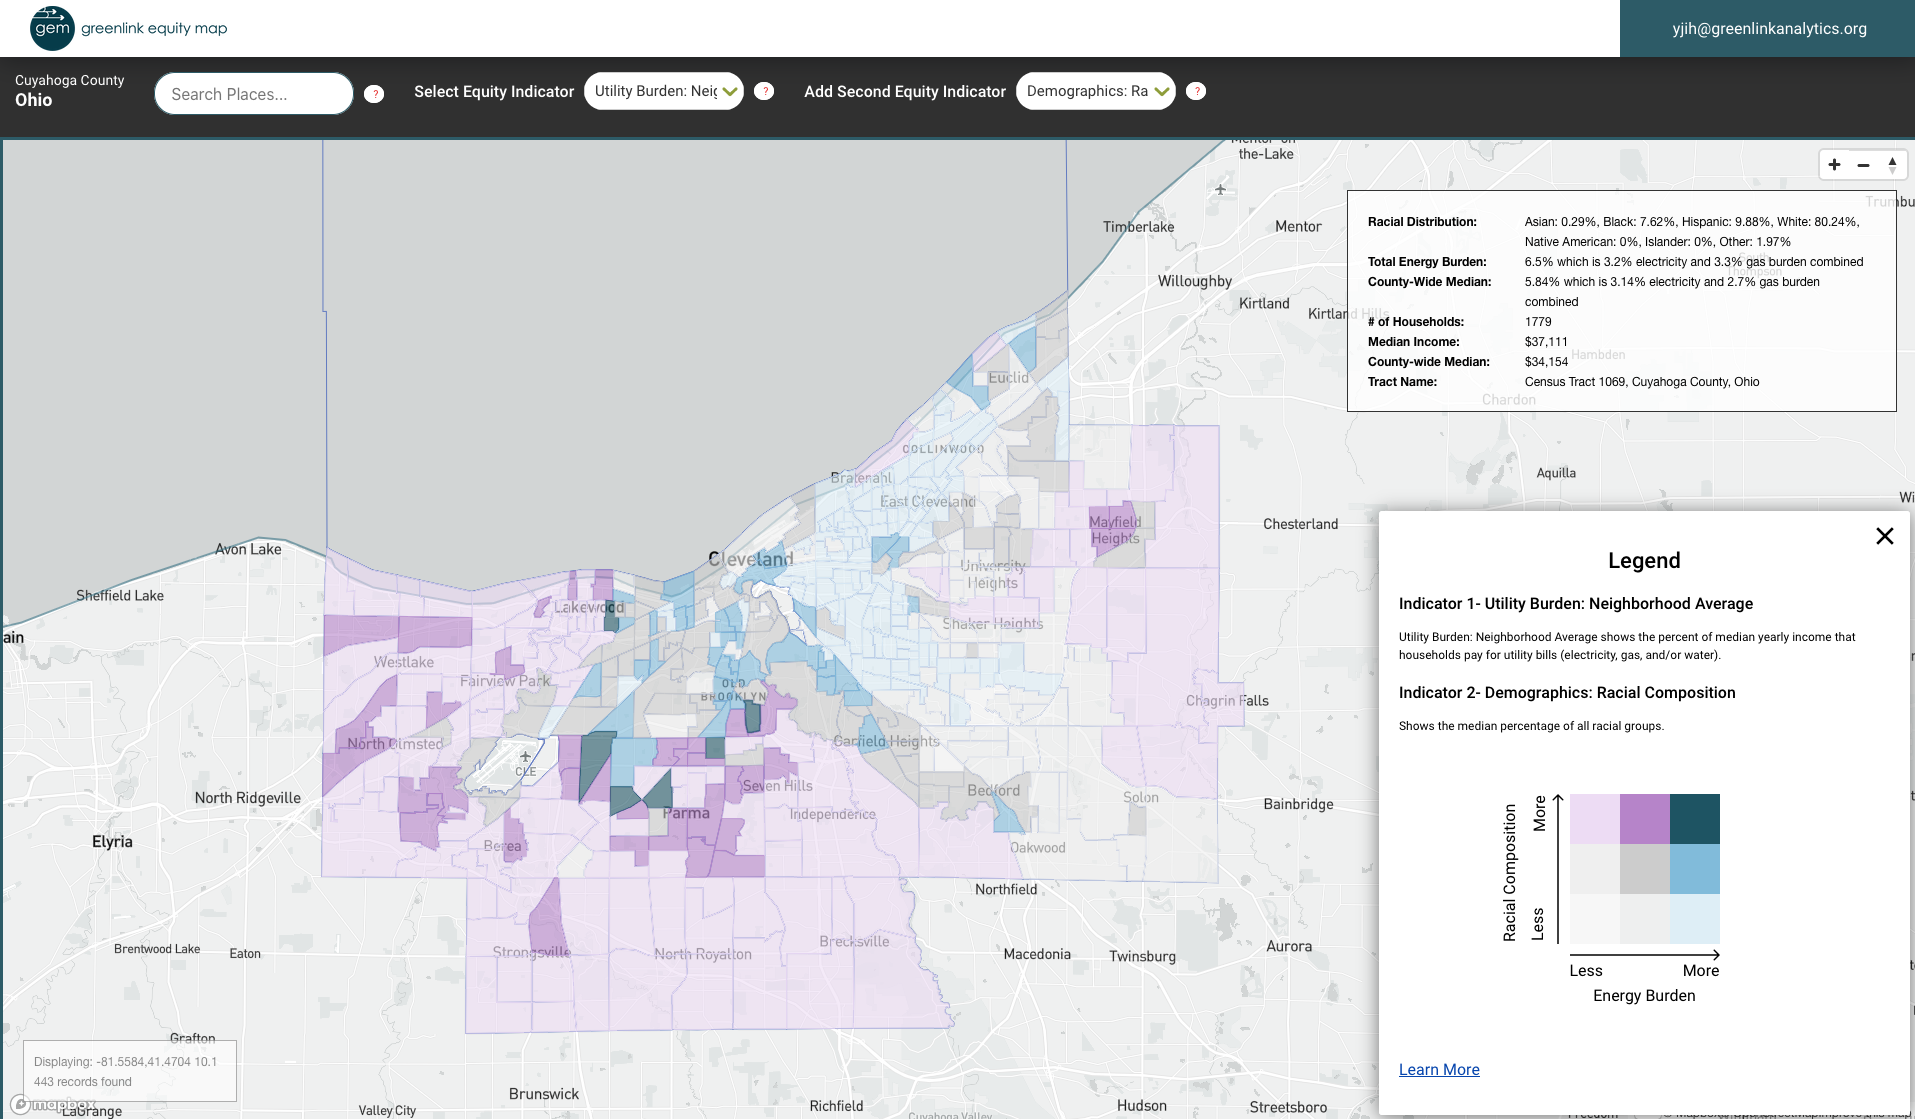 A Greenlink Equity Map showing energy burden in predominantly white communities in Cleveland.